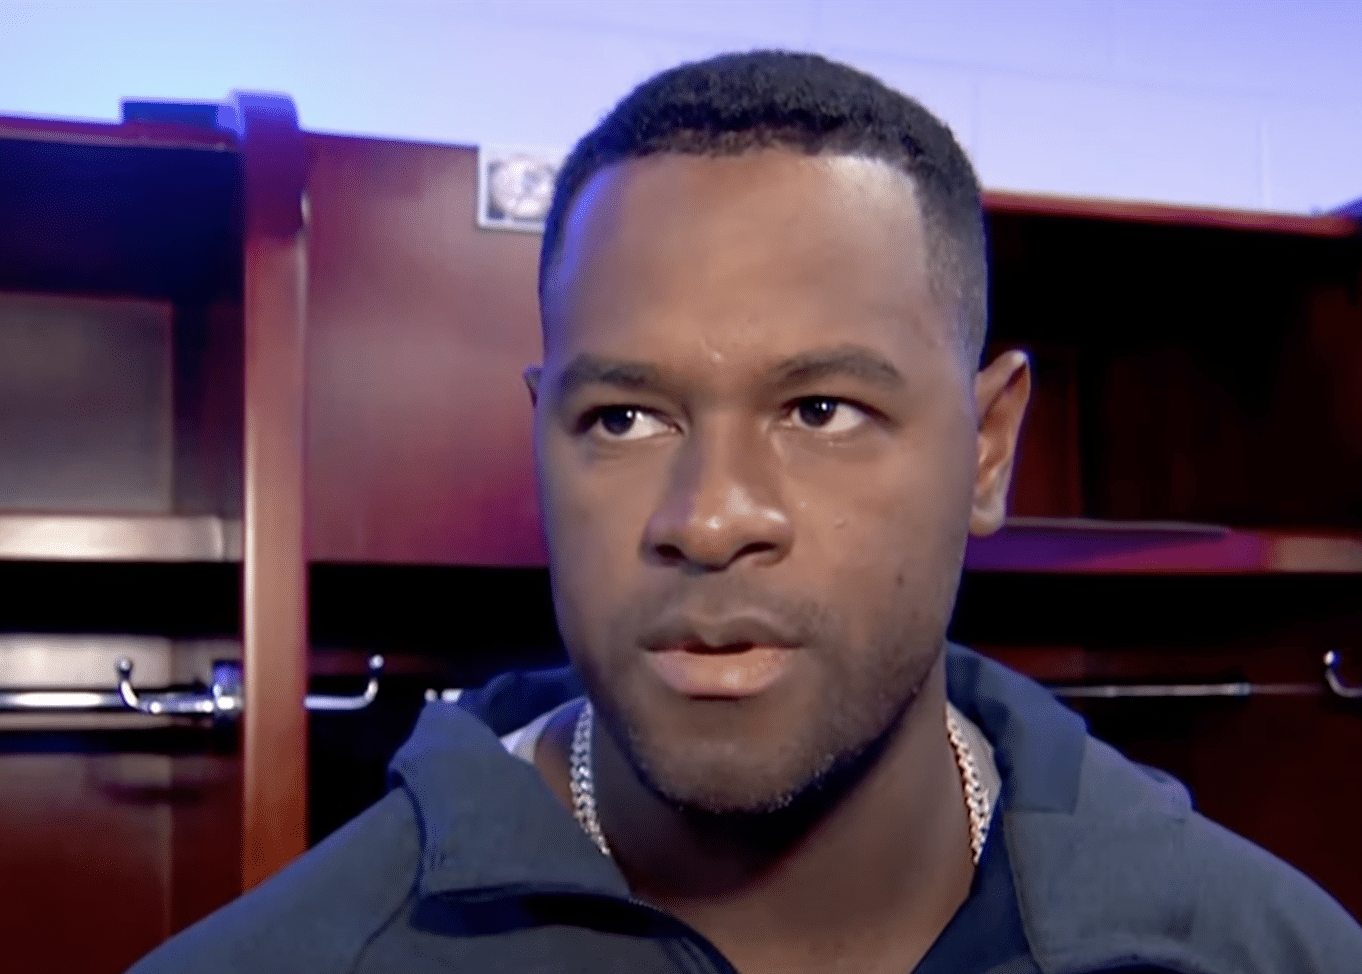 mutual interest between Detroit Tigers and Luis Severino